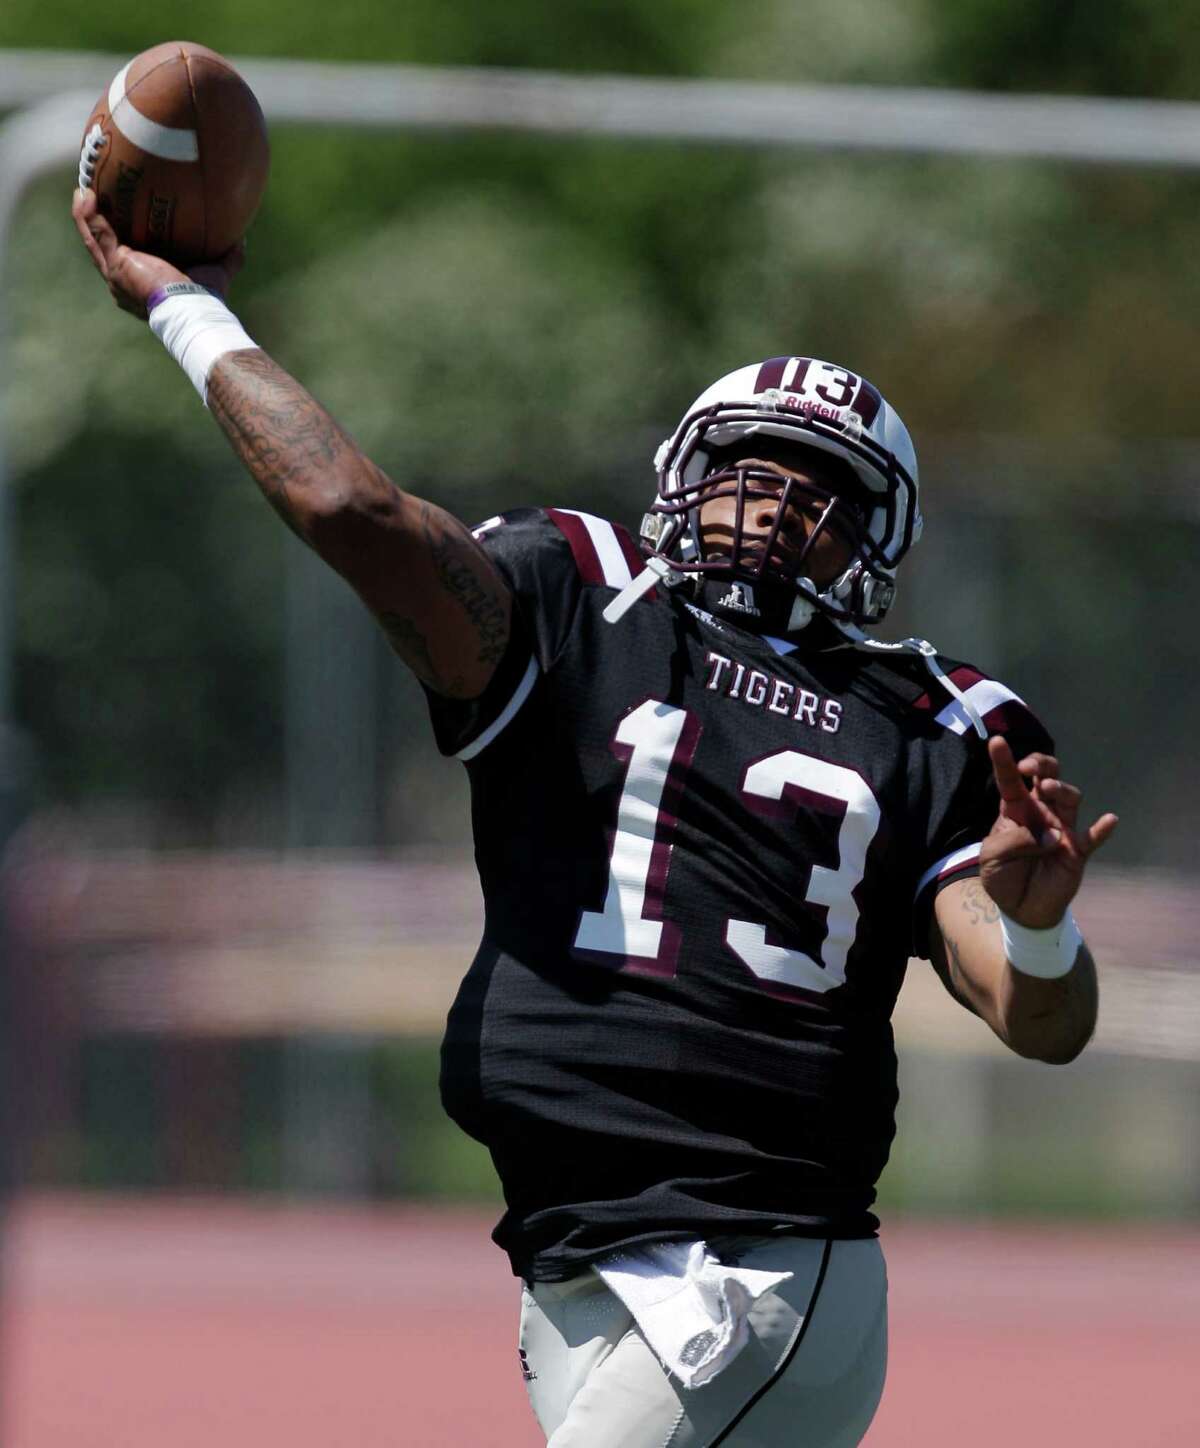 Texas Southern University Tiger's QB Riko Small makes a pass during the spring football game at TSU's Alexander Durley Stadium Saturday, April 21, 2012, in Houston.